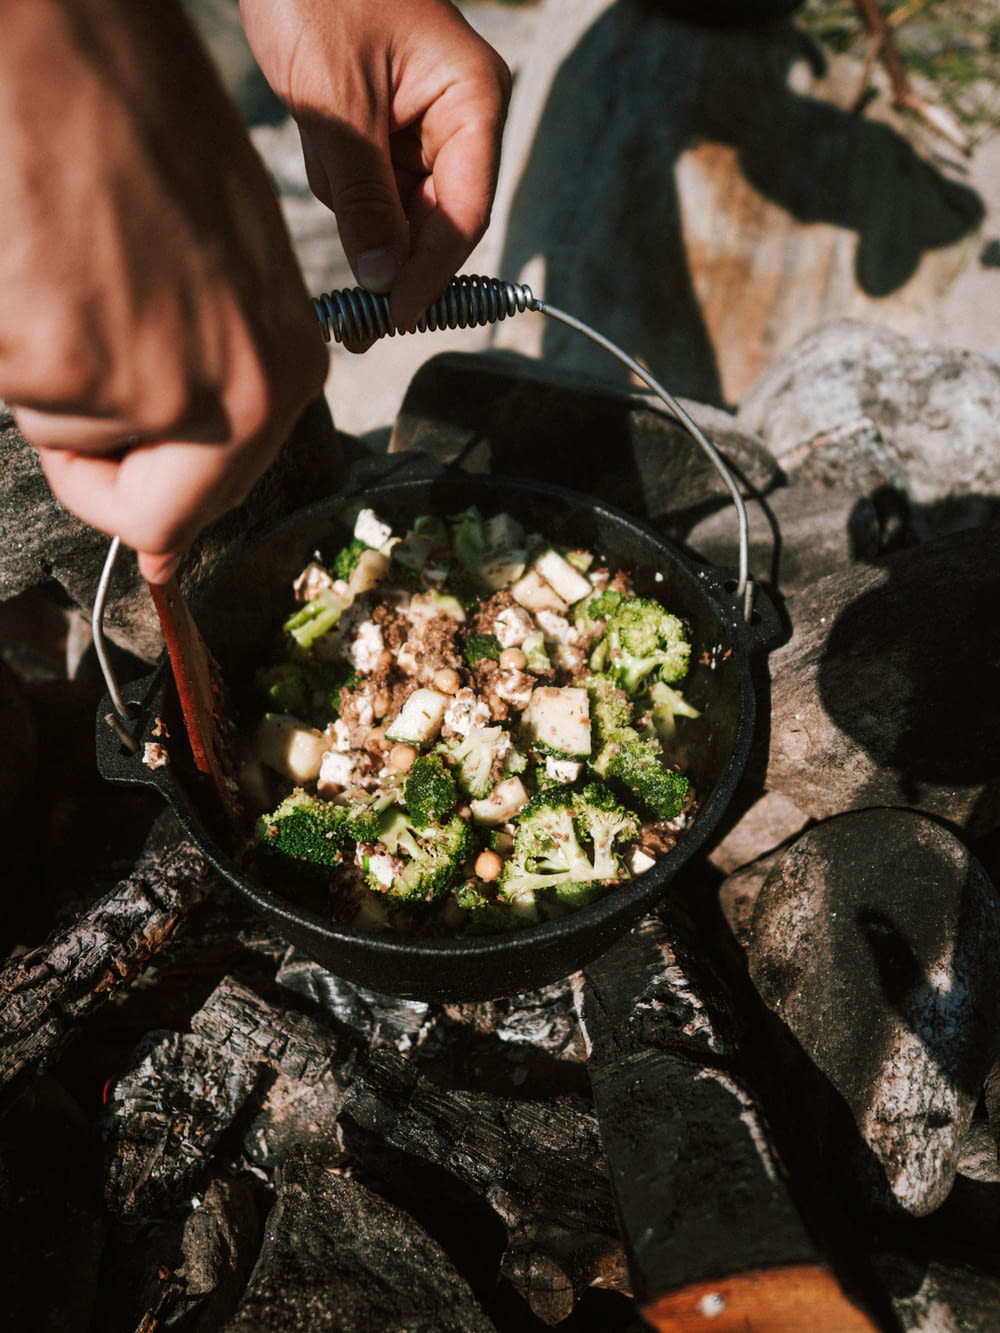 a person is cooking broccoli and other food on a campfire